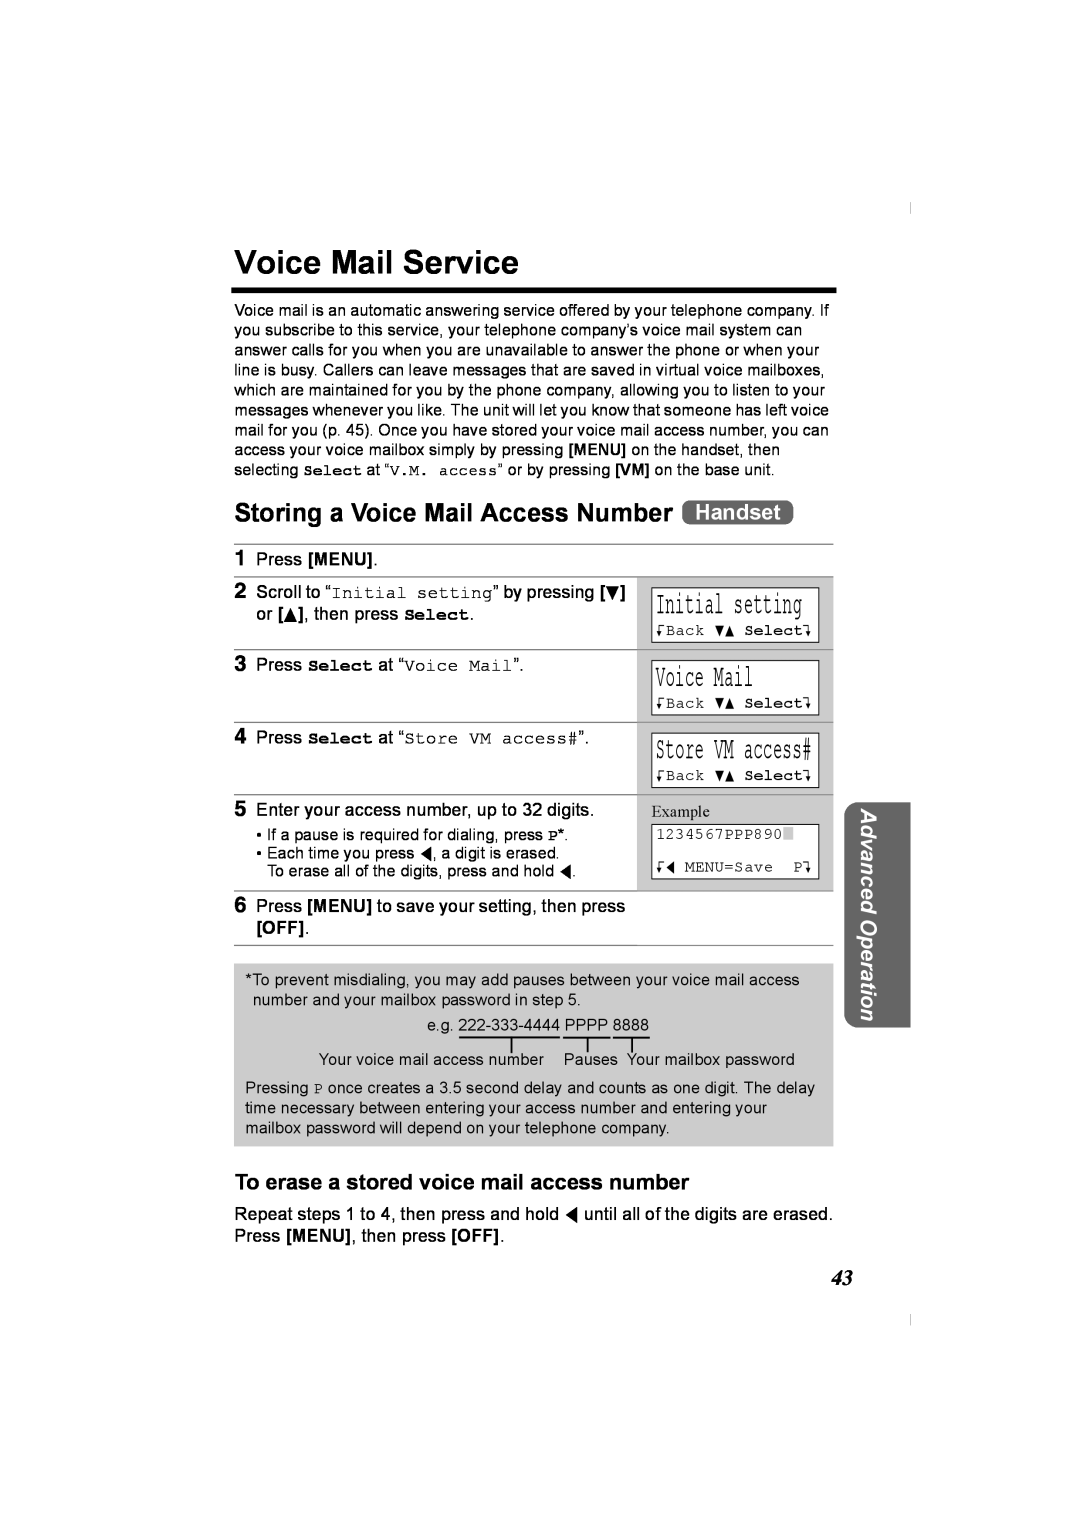 Panasonic KX-TG2336C Voice Mail Service, Storing a Voice Mail Access Number Handset, Press Select at “Voice Mail”, Example 